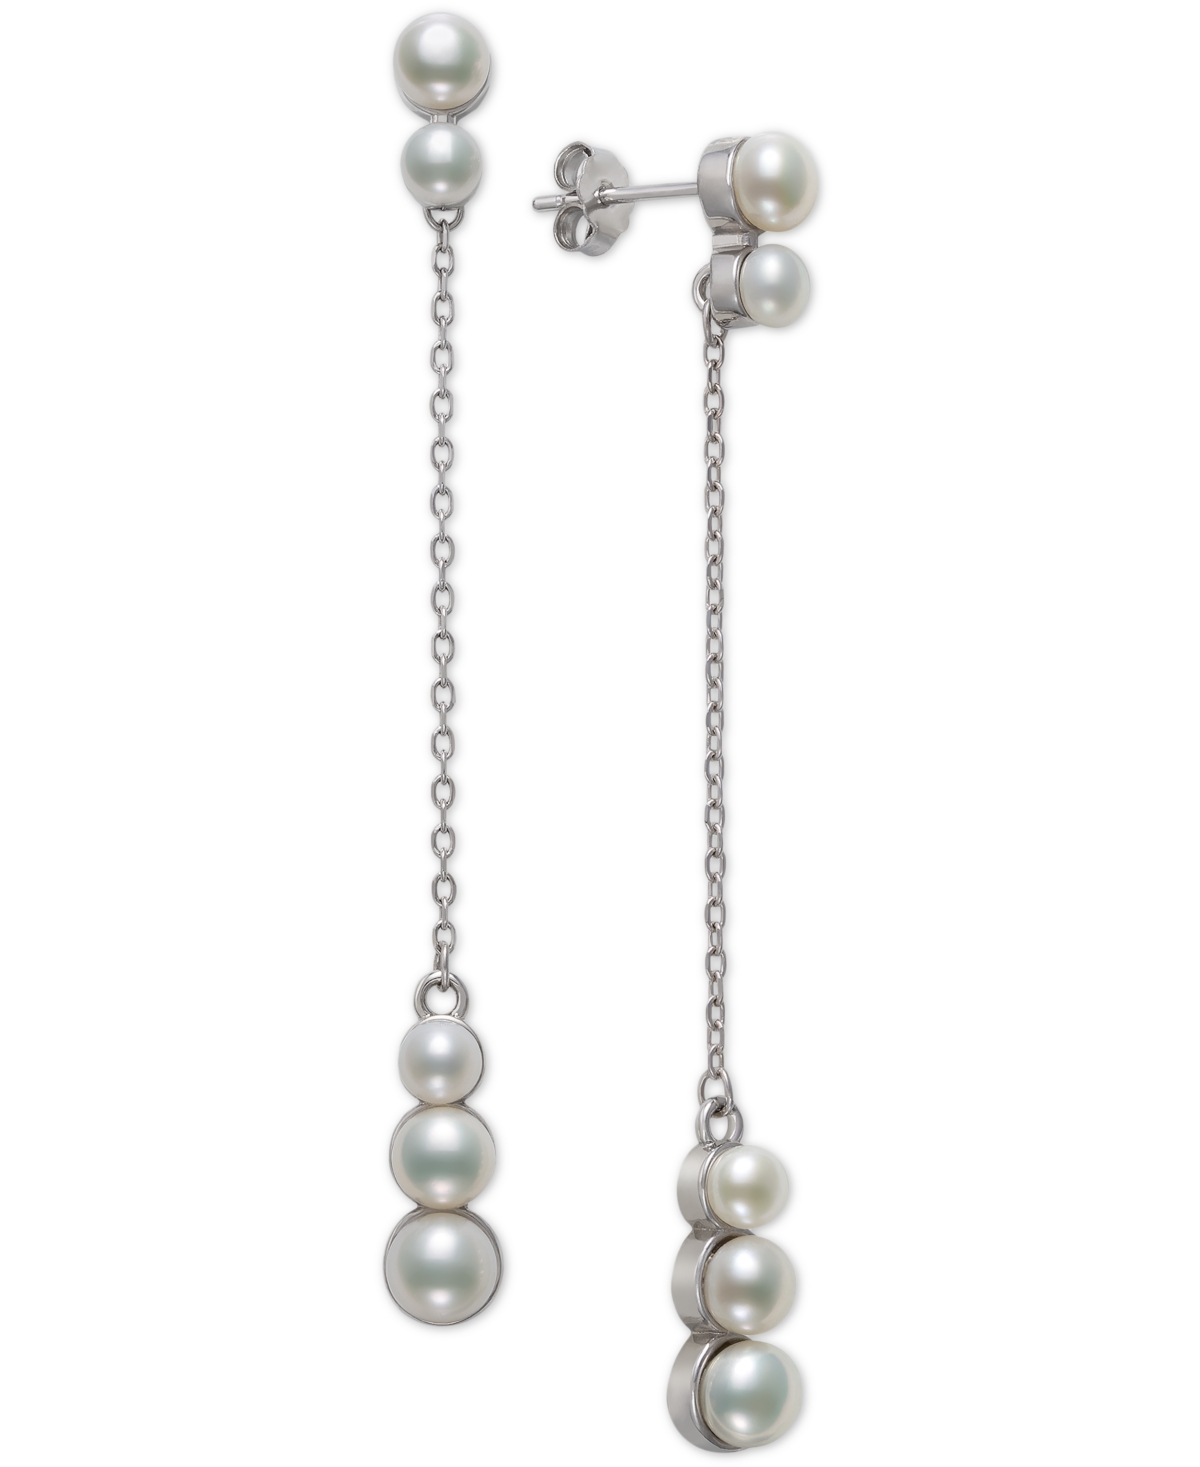 Cultured Freshwater Button Pearl (4-6mm) Linear Chain Drop Earrings in Sterling Silver, Created for Macy's - Sterling Silver